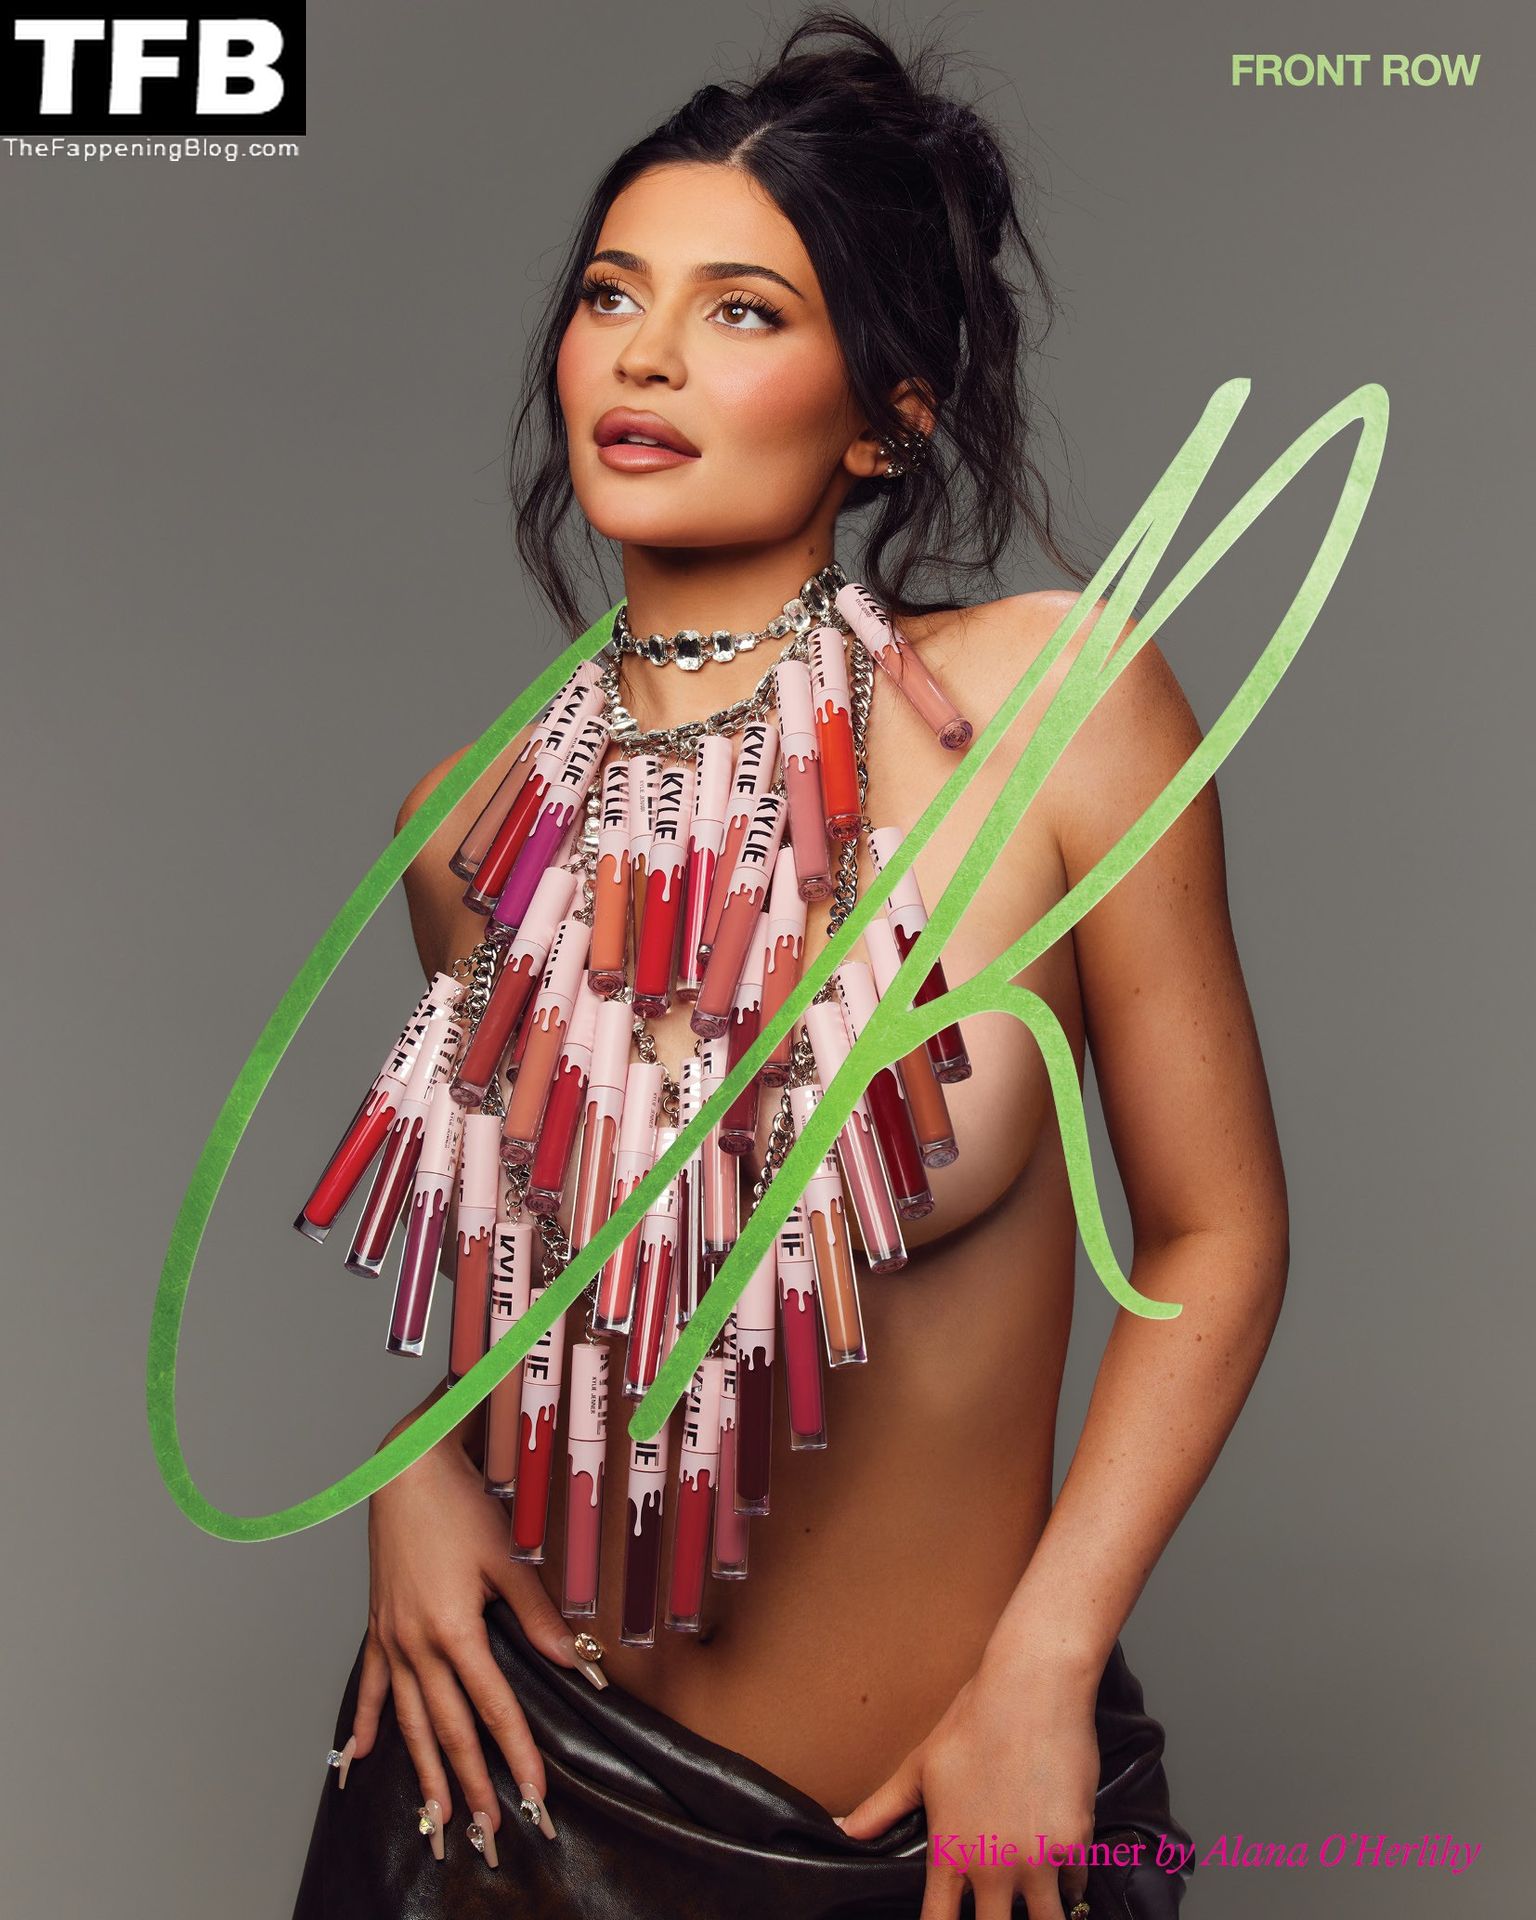 Kylie Jenner Sexy 1 1 - Kylie Jenner Sexy & Topless – CR Fashion Book (22 Photos)